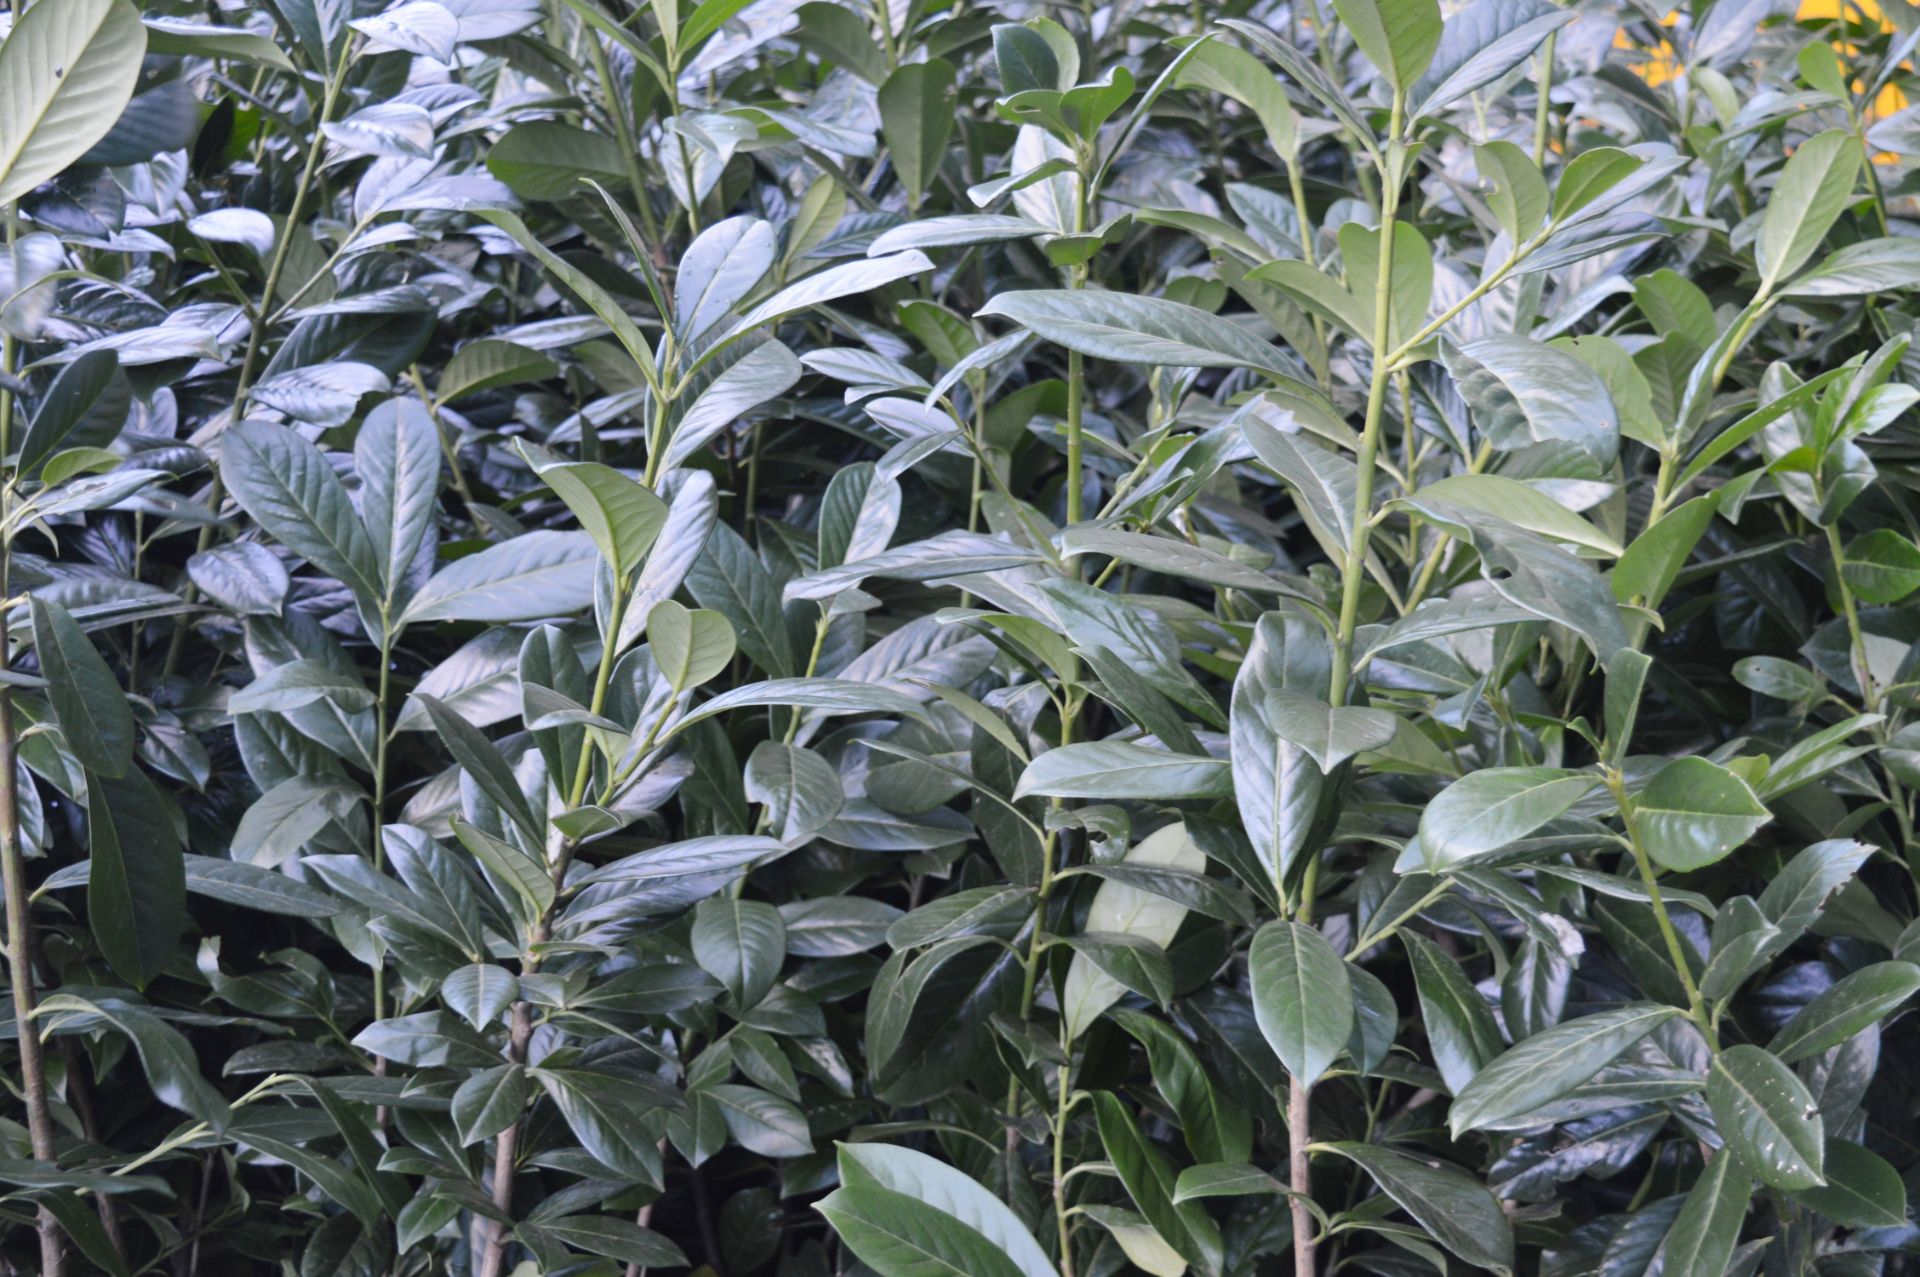 10 x Laurel Potted Garden Plants - Approx 4 to 5 Feet Tall - CL057 - Location: Welwyn, - Image 2 of 5